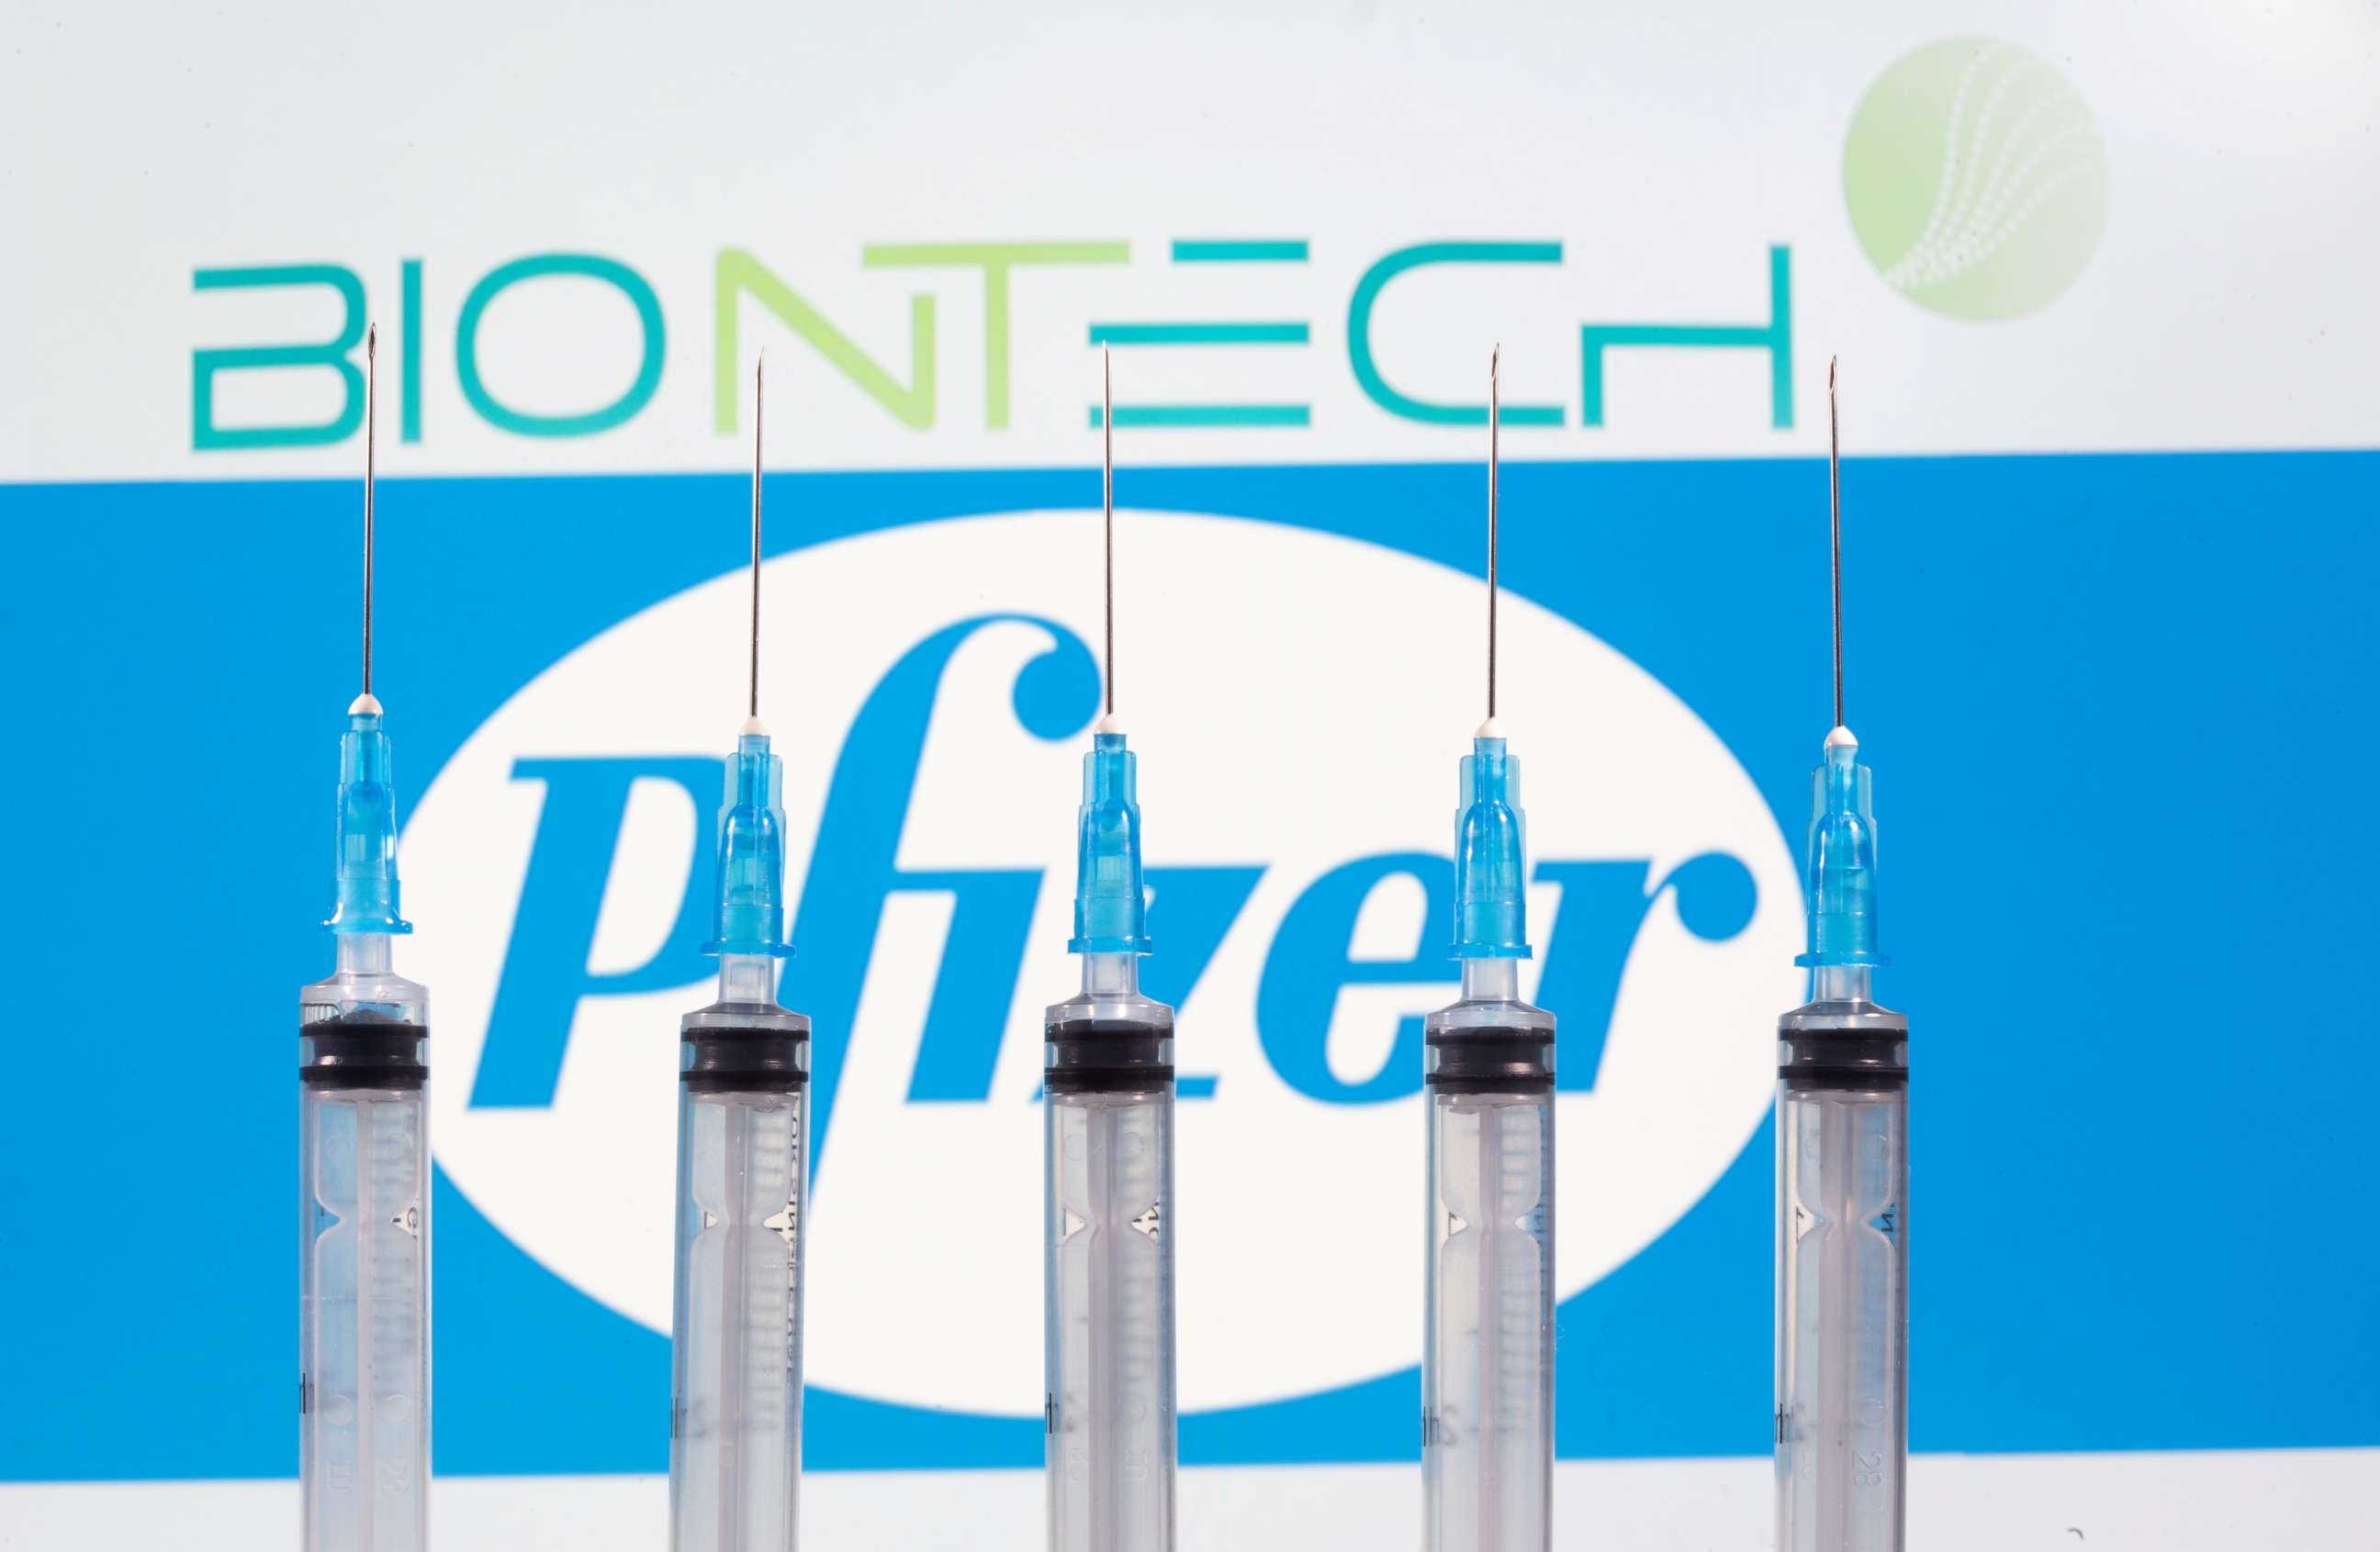 PHOTO: Syringes are seen in front of the displayed logos of BioNTech and Pfizer in this illustration taken on Nov. 10, 2020.